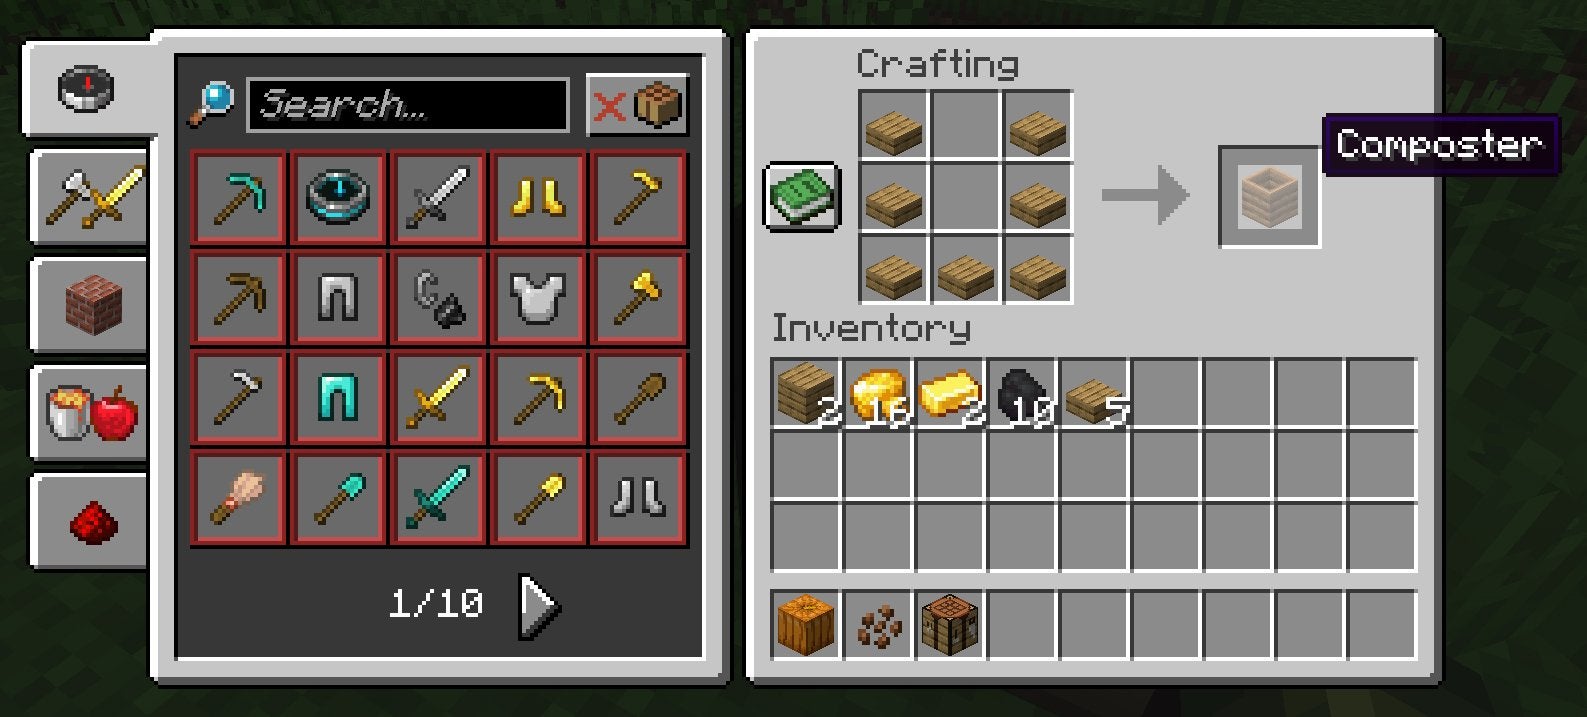 The crafting recipe for a Composter in Minecraft.